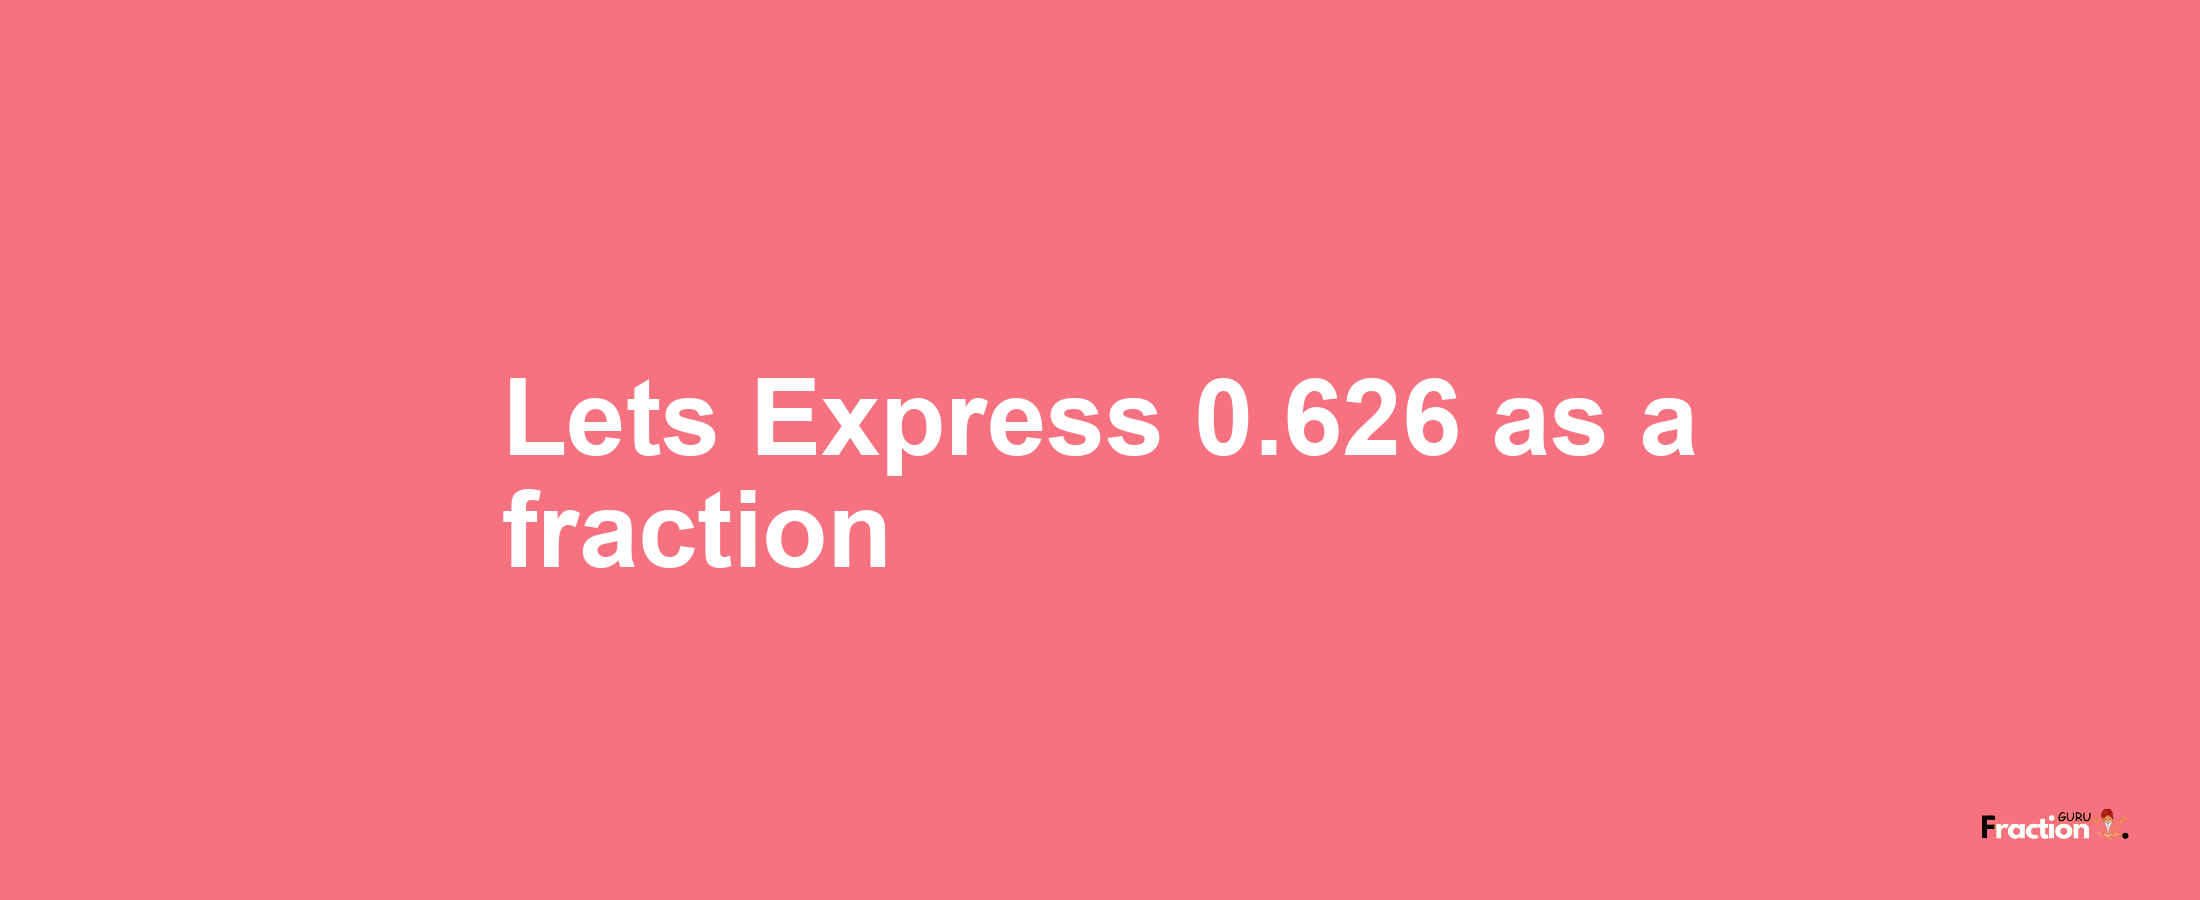 Lets Express 0.626 as afraction